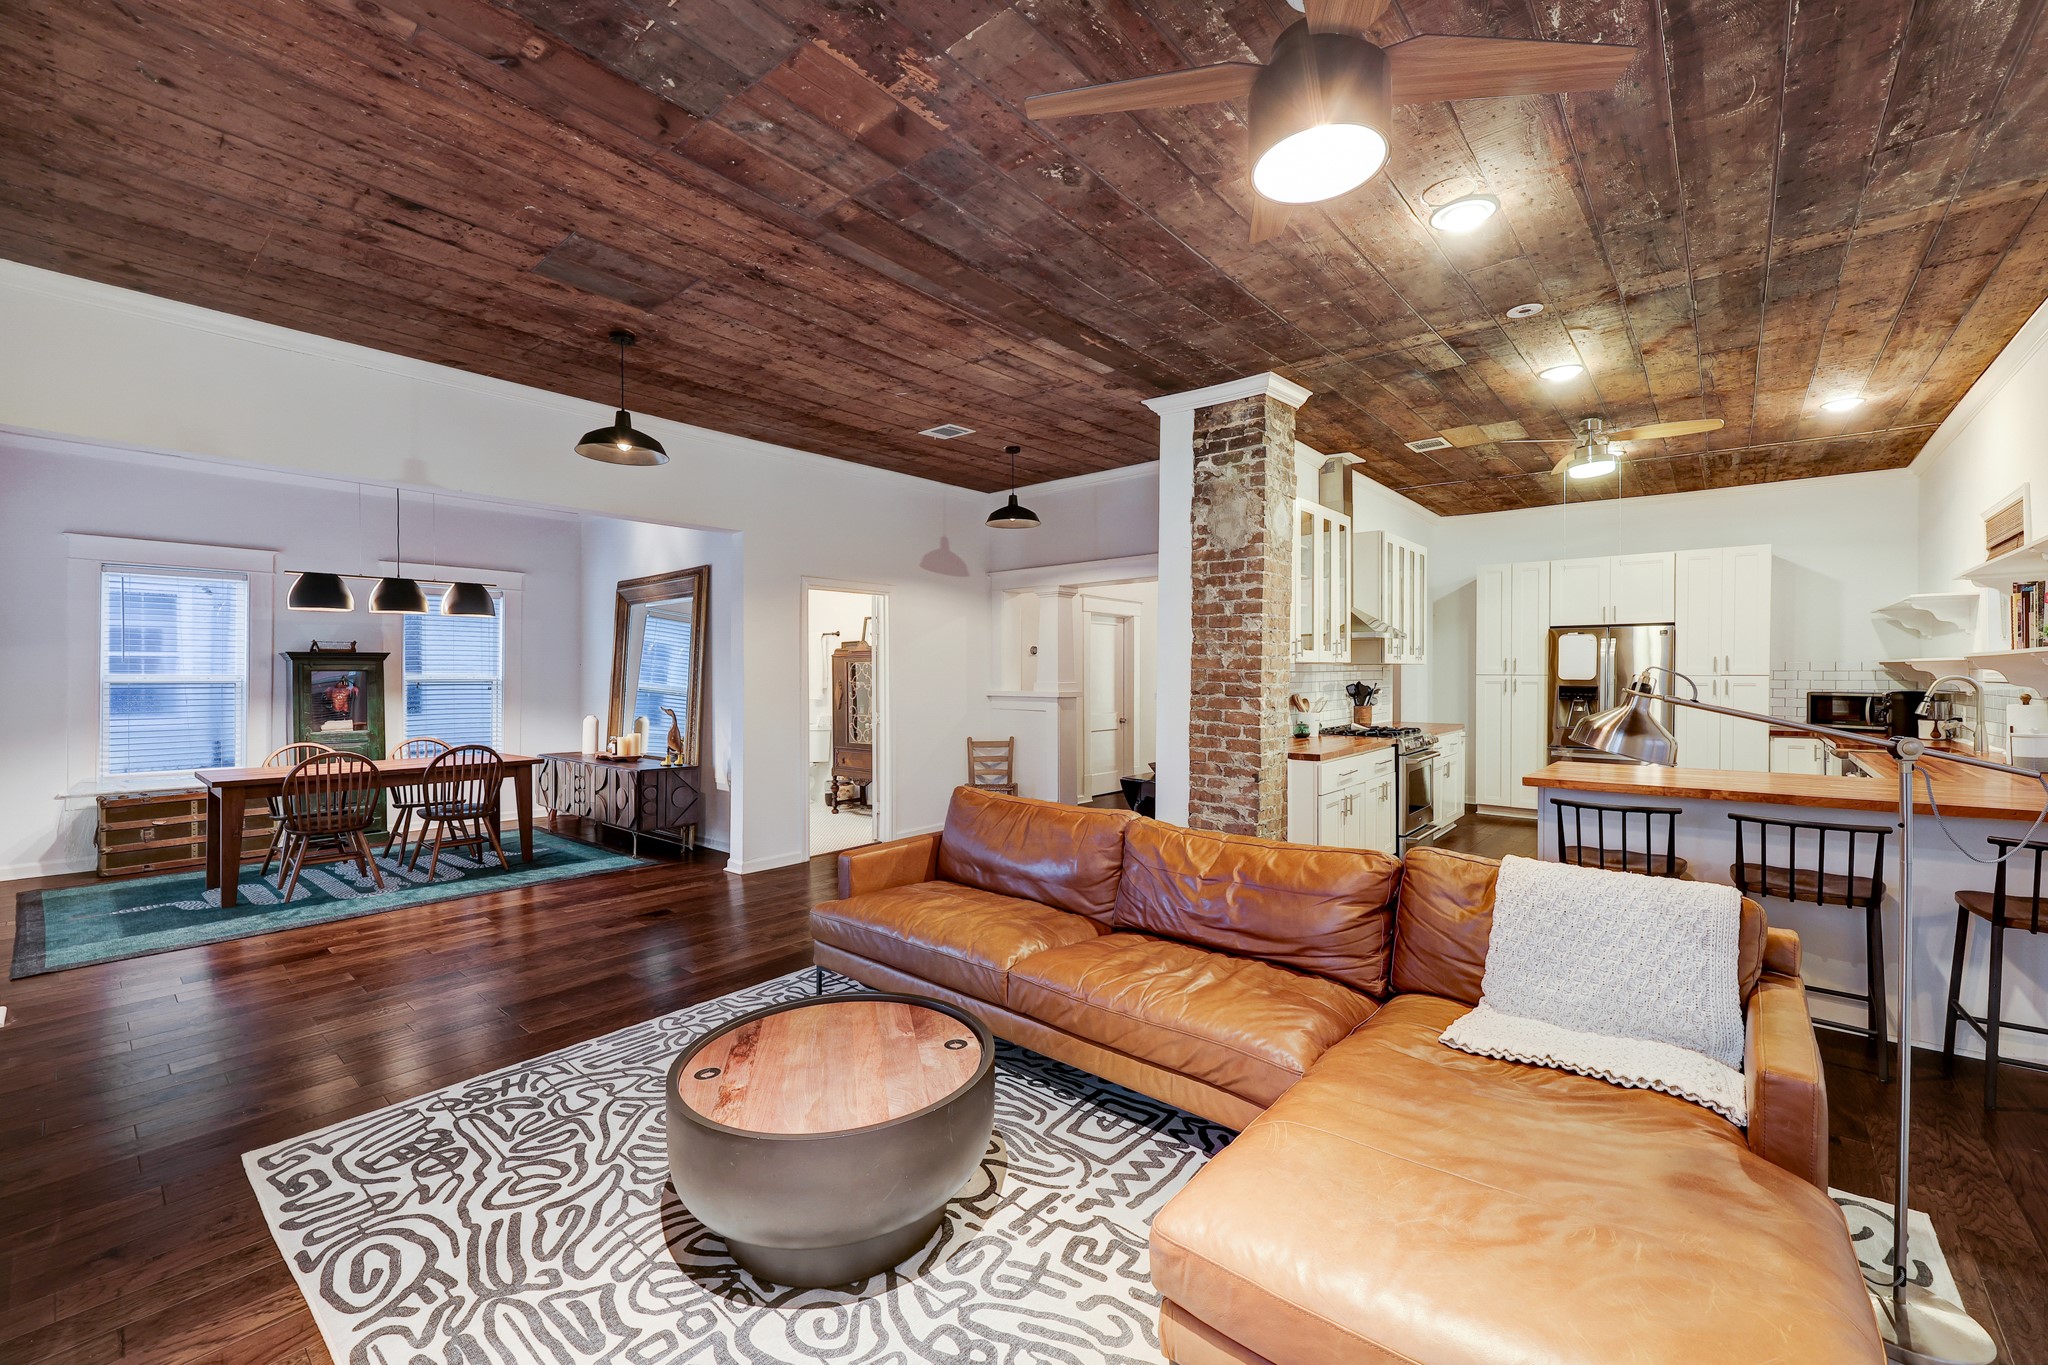 From this angle, we can admire the gorgeous ceilings, the original brick from a long-gone wood burning stove, the vintage window casings, and craftsman built-ins.